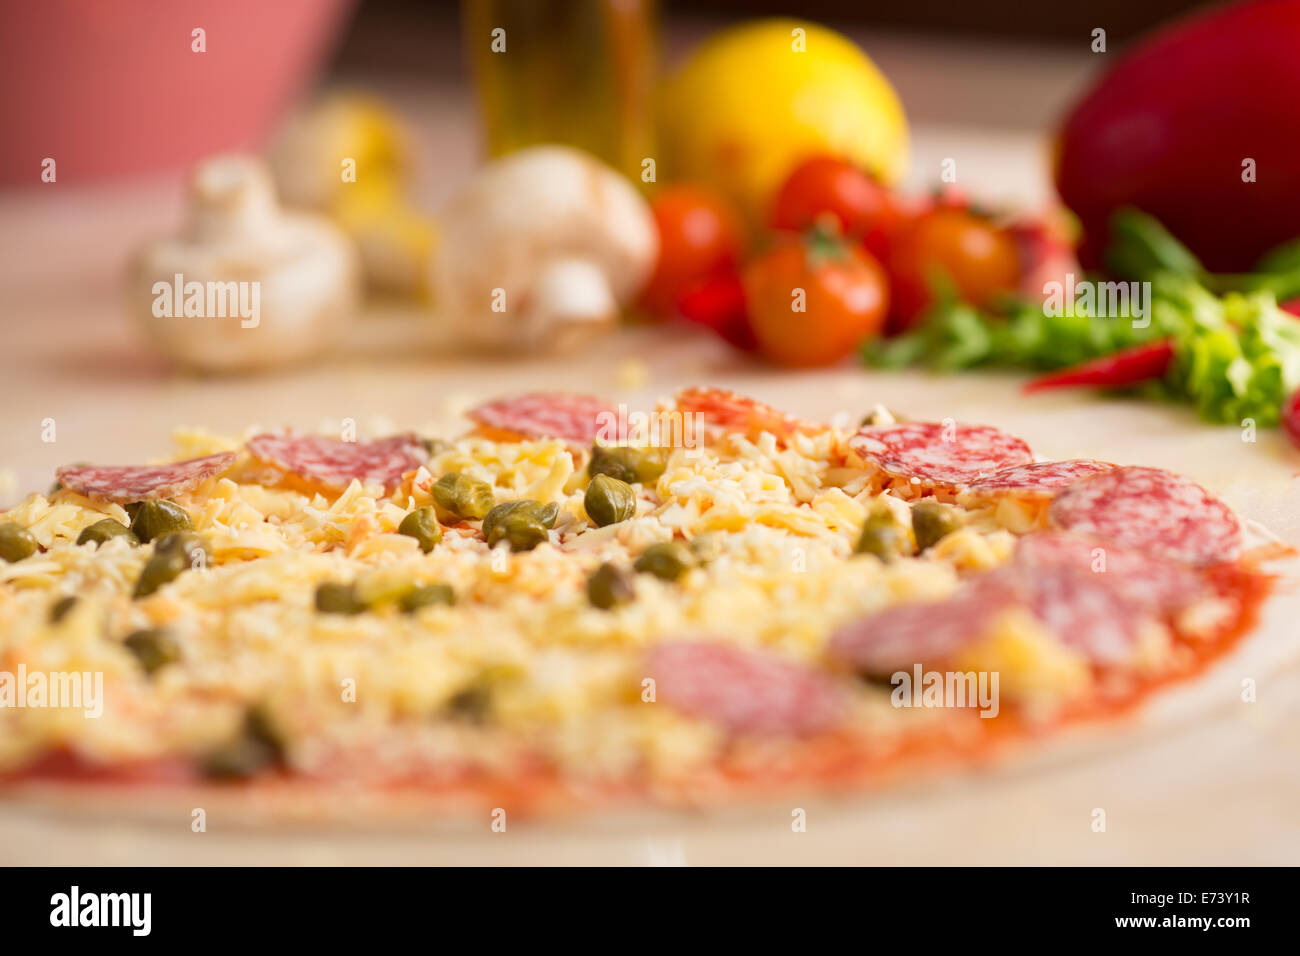 raw italian salami pizza on table with ingredients Stock Photo